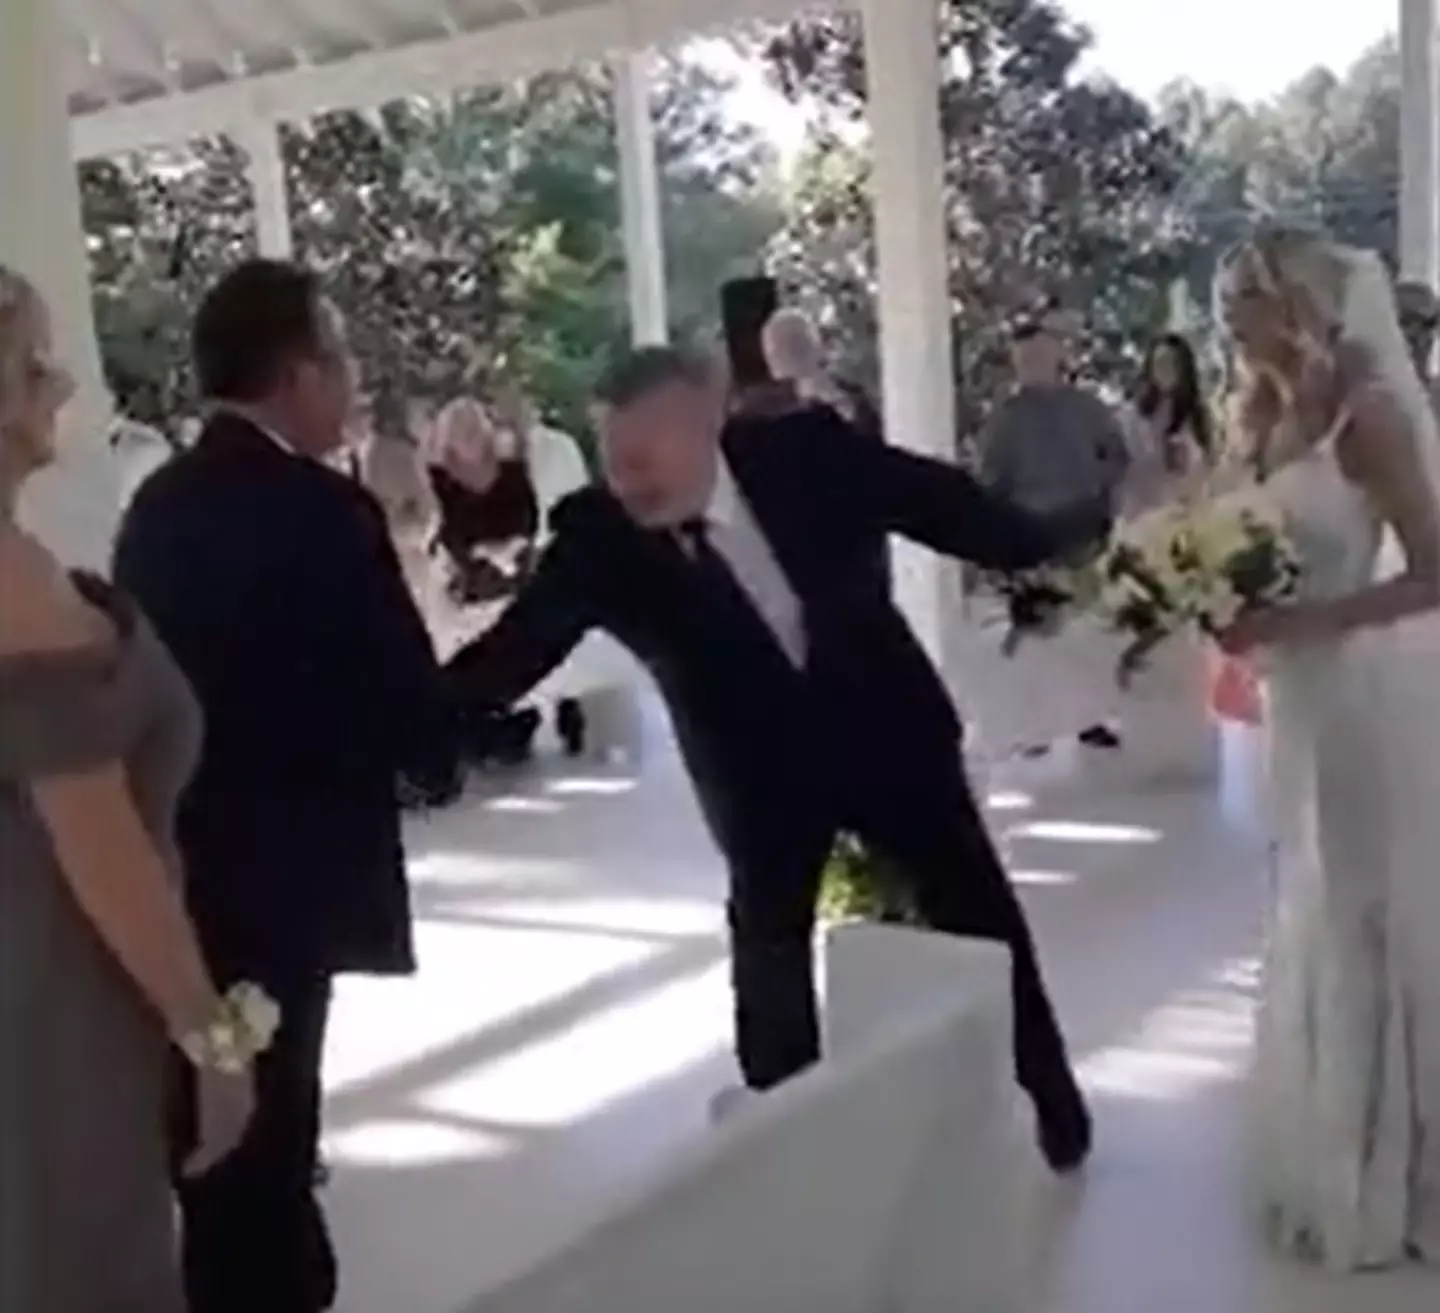 The father of the bride brought her stepfather over to help walk his daughter down the aisle.